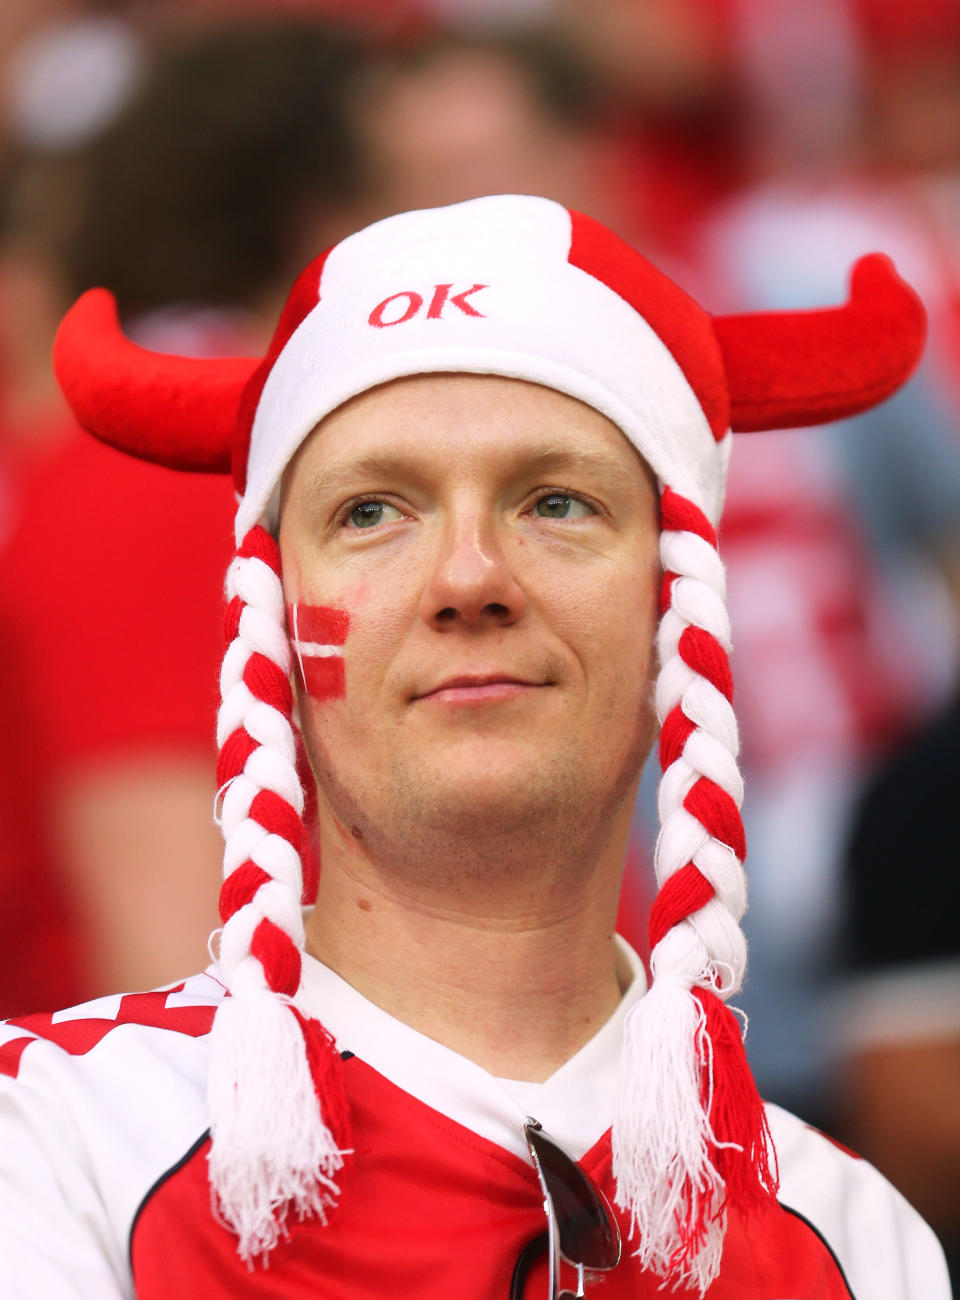 L'VIV, UKRAINE - JUNE 17: A Denmark fan enjoys the prematch atmopshere during the UEFA EURO 2012 group B match between Denmark and Germany at Arena Lviv on June 17, 2012 in L'viv, Ukraine. (Photo by Joern Pollex/Getty Images)